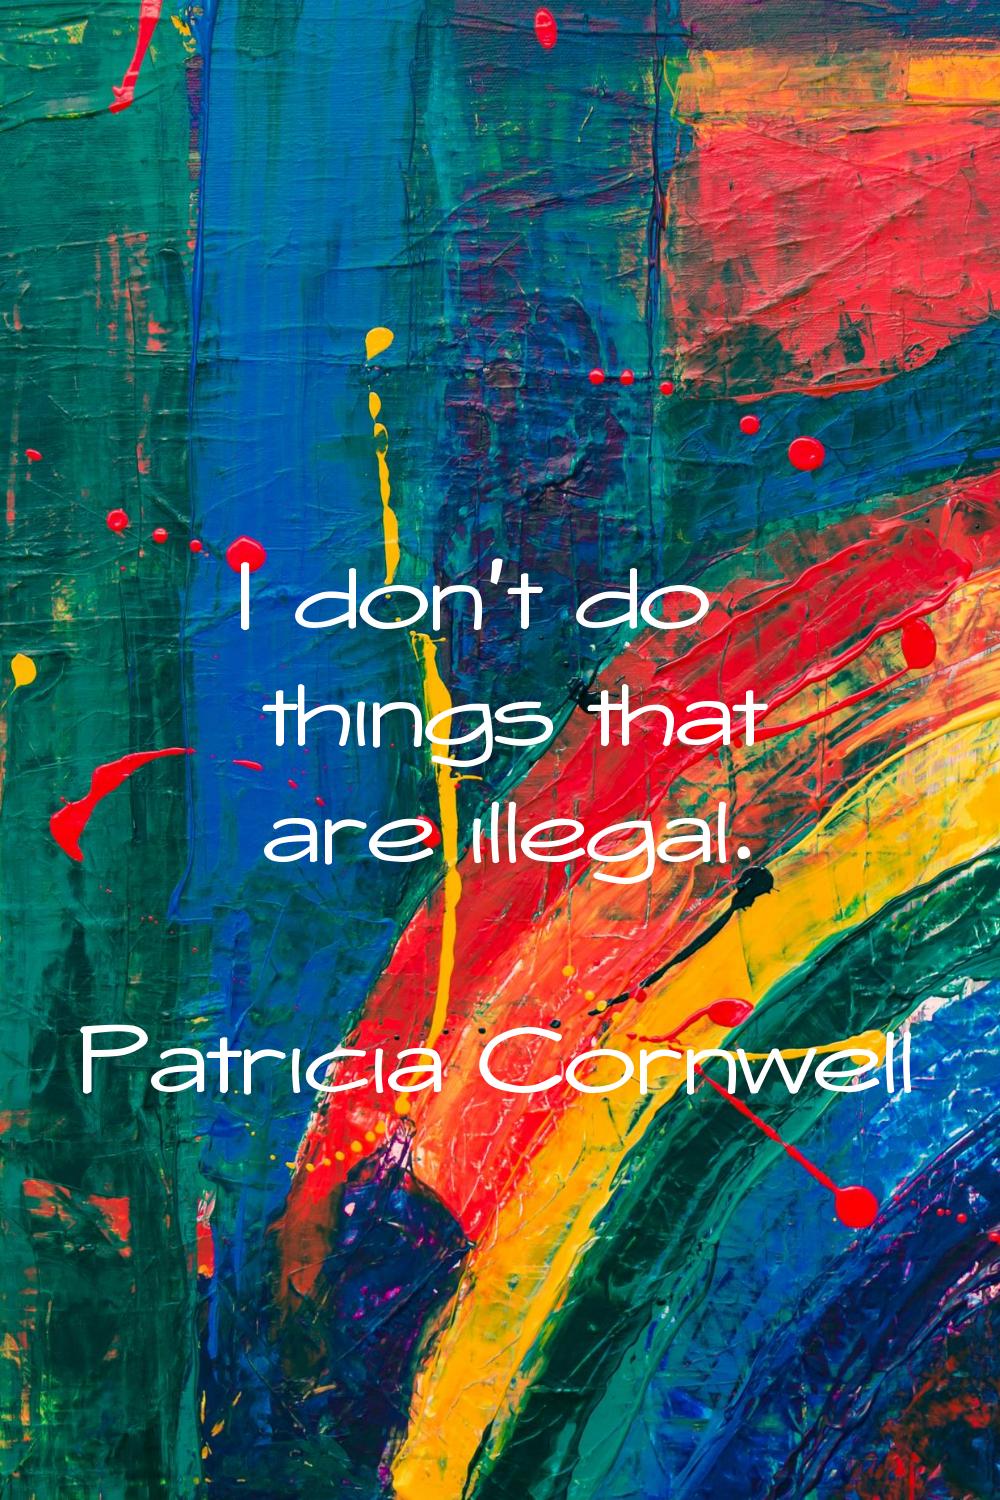 I don't do things that are illegal.